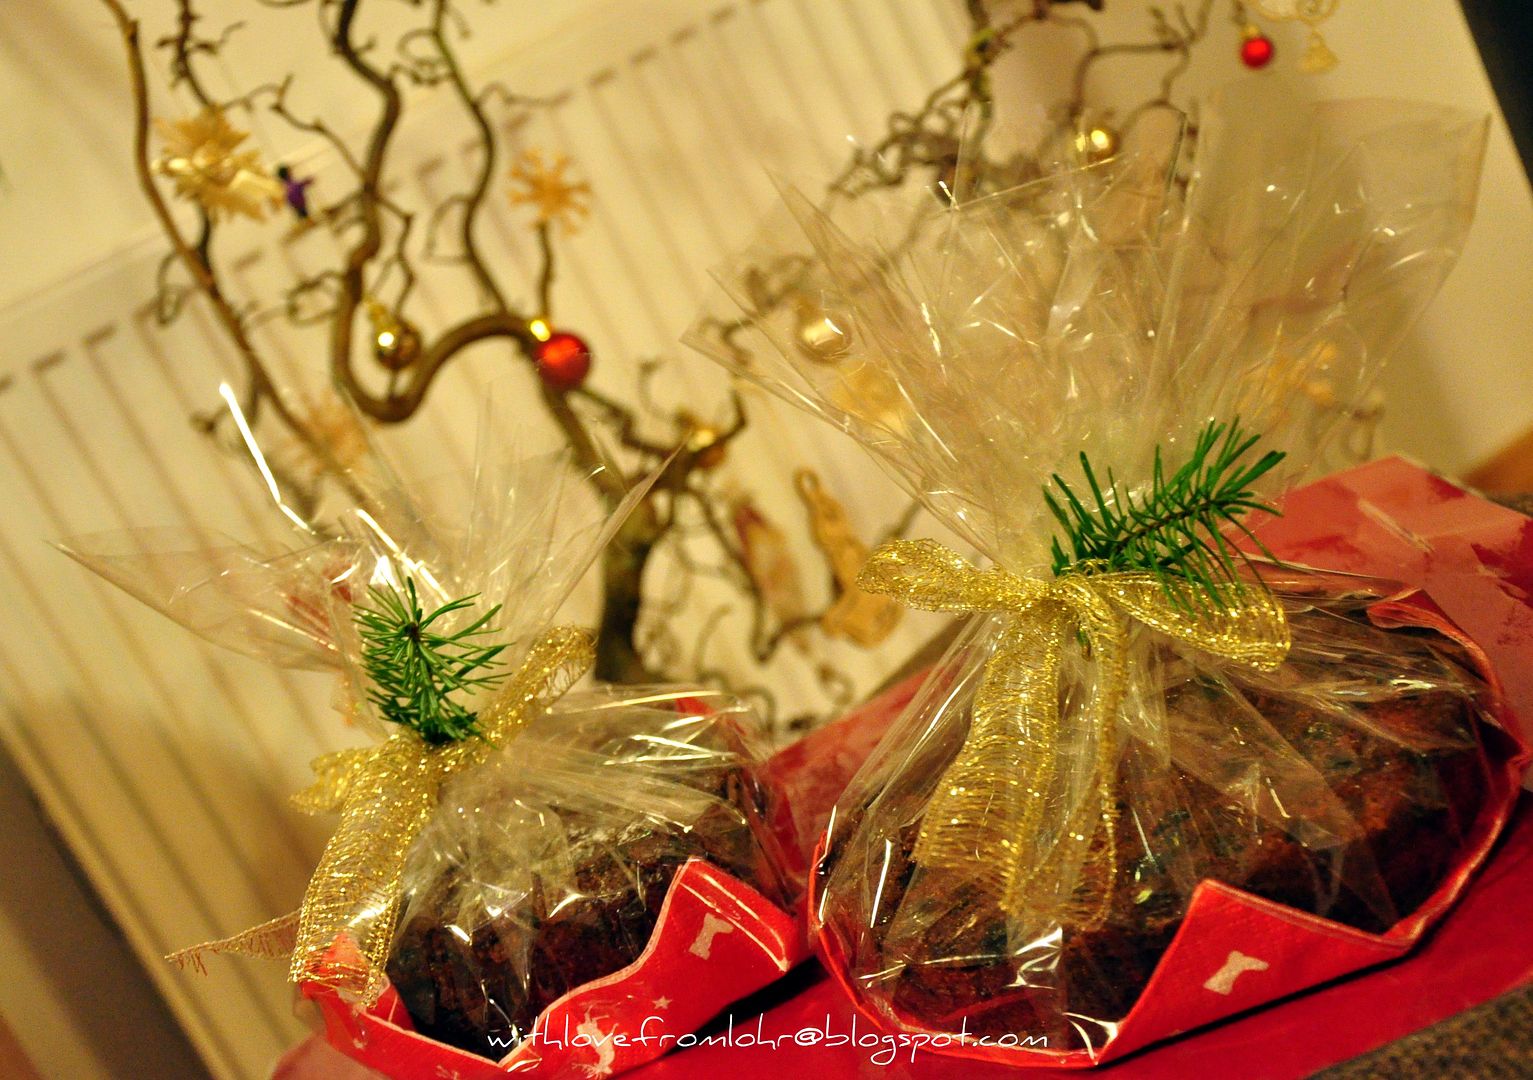 13.12.11, I have been busy baking and gifting Indian plum cakes to all my friends in Lohr.